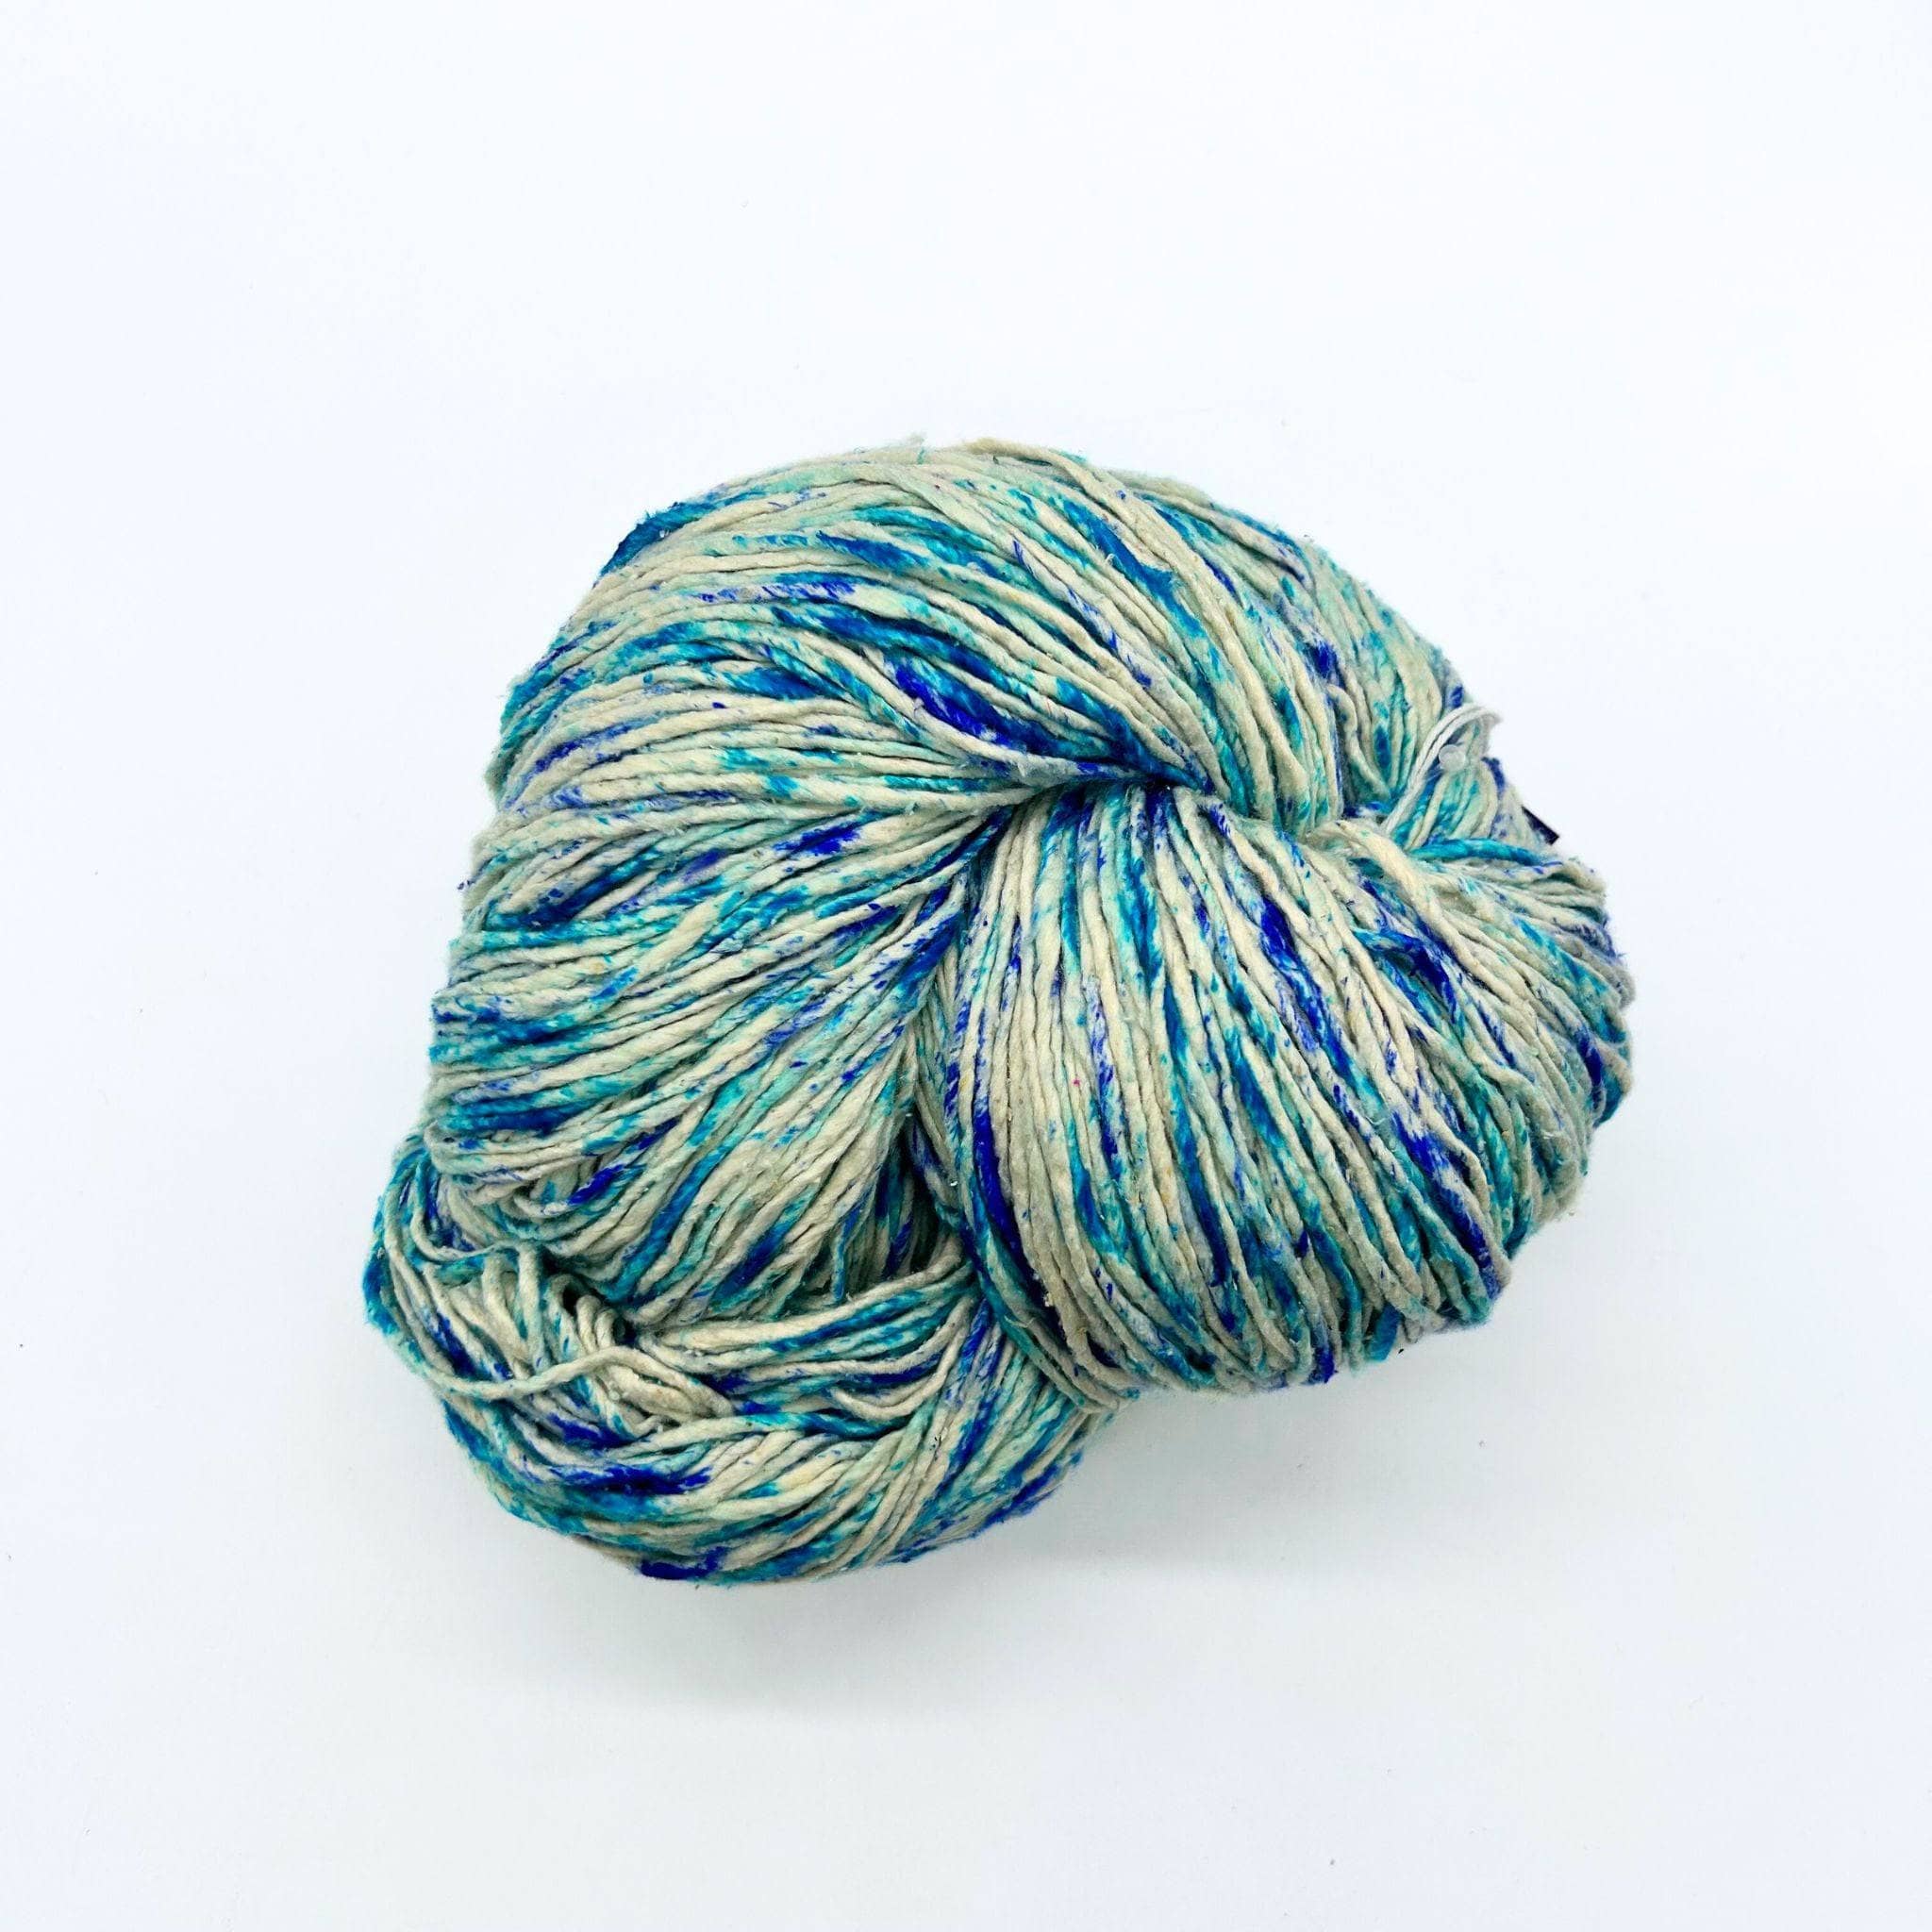 What Does Worsted Weight Mean? – Darn Good Yarn